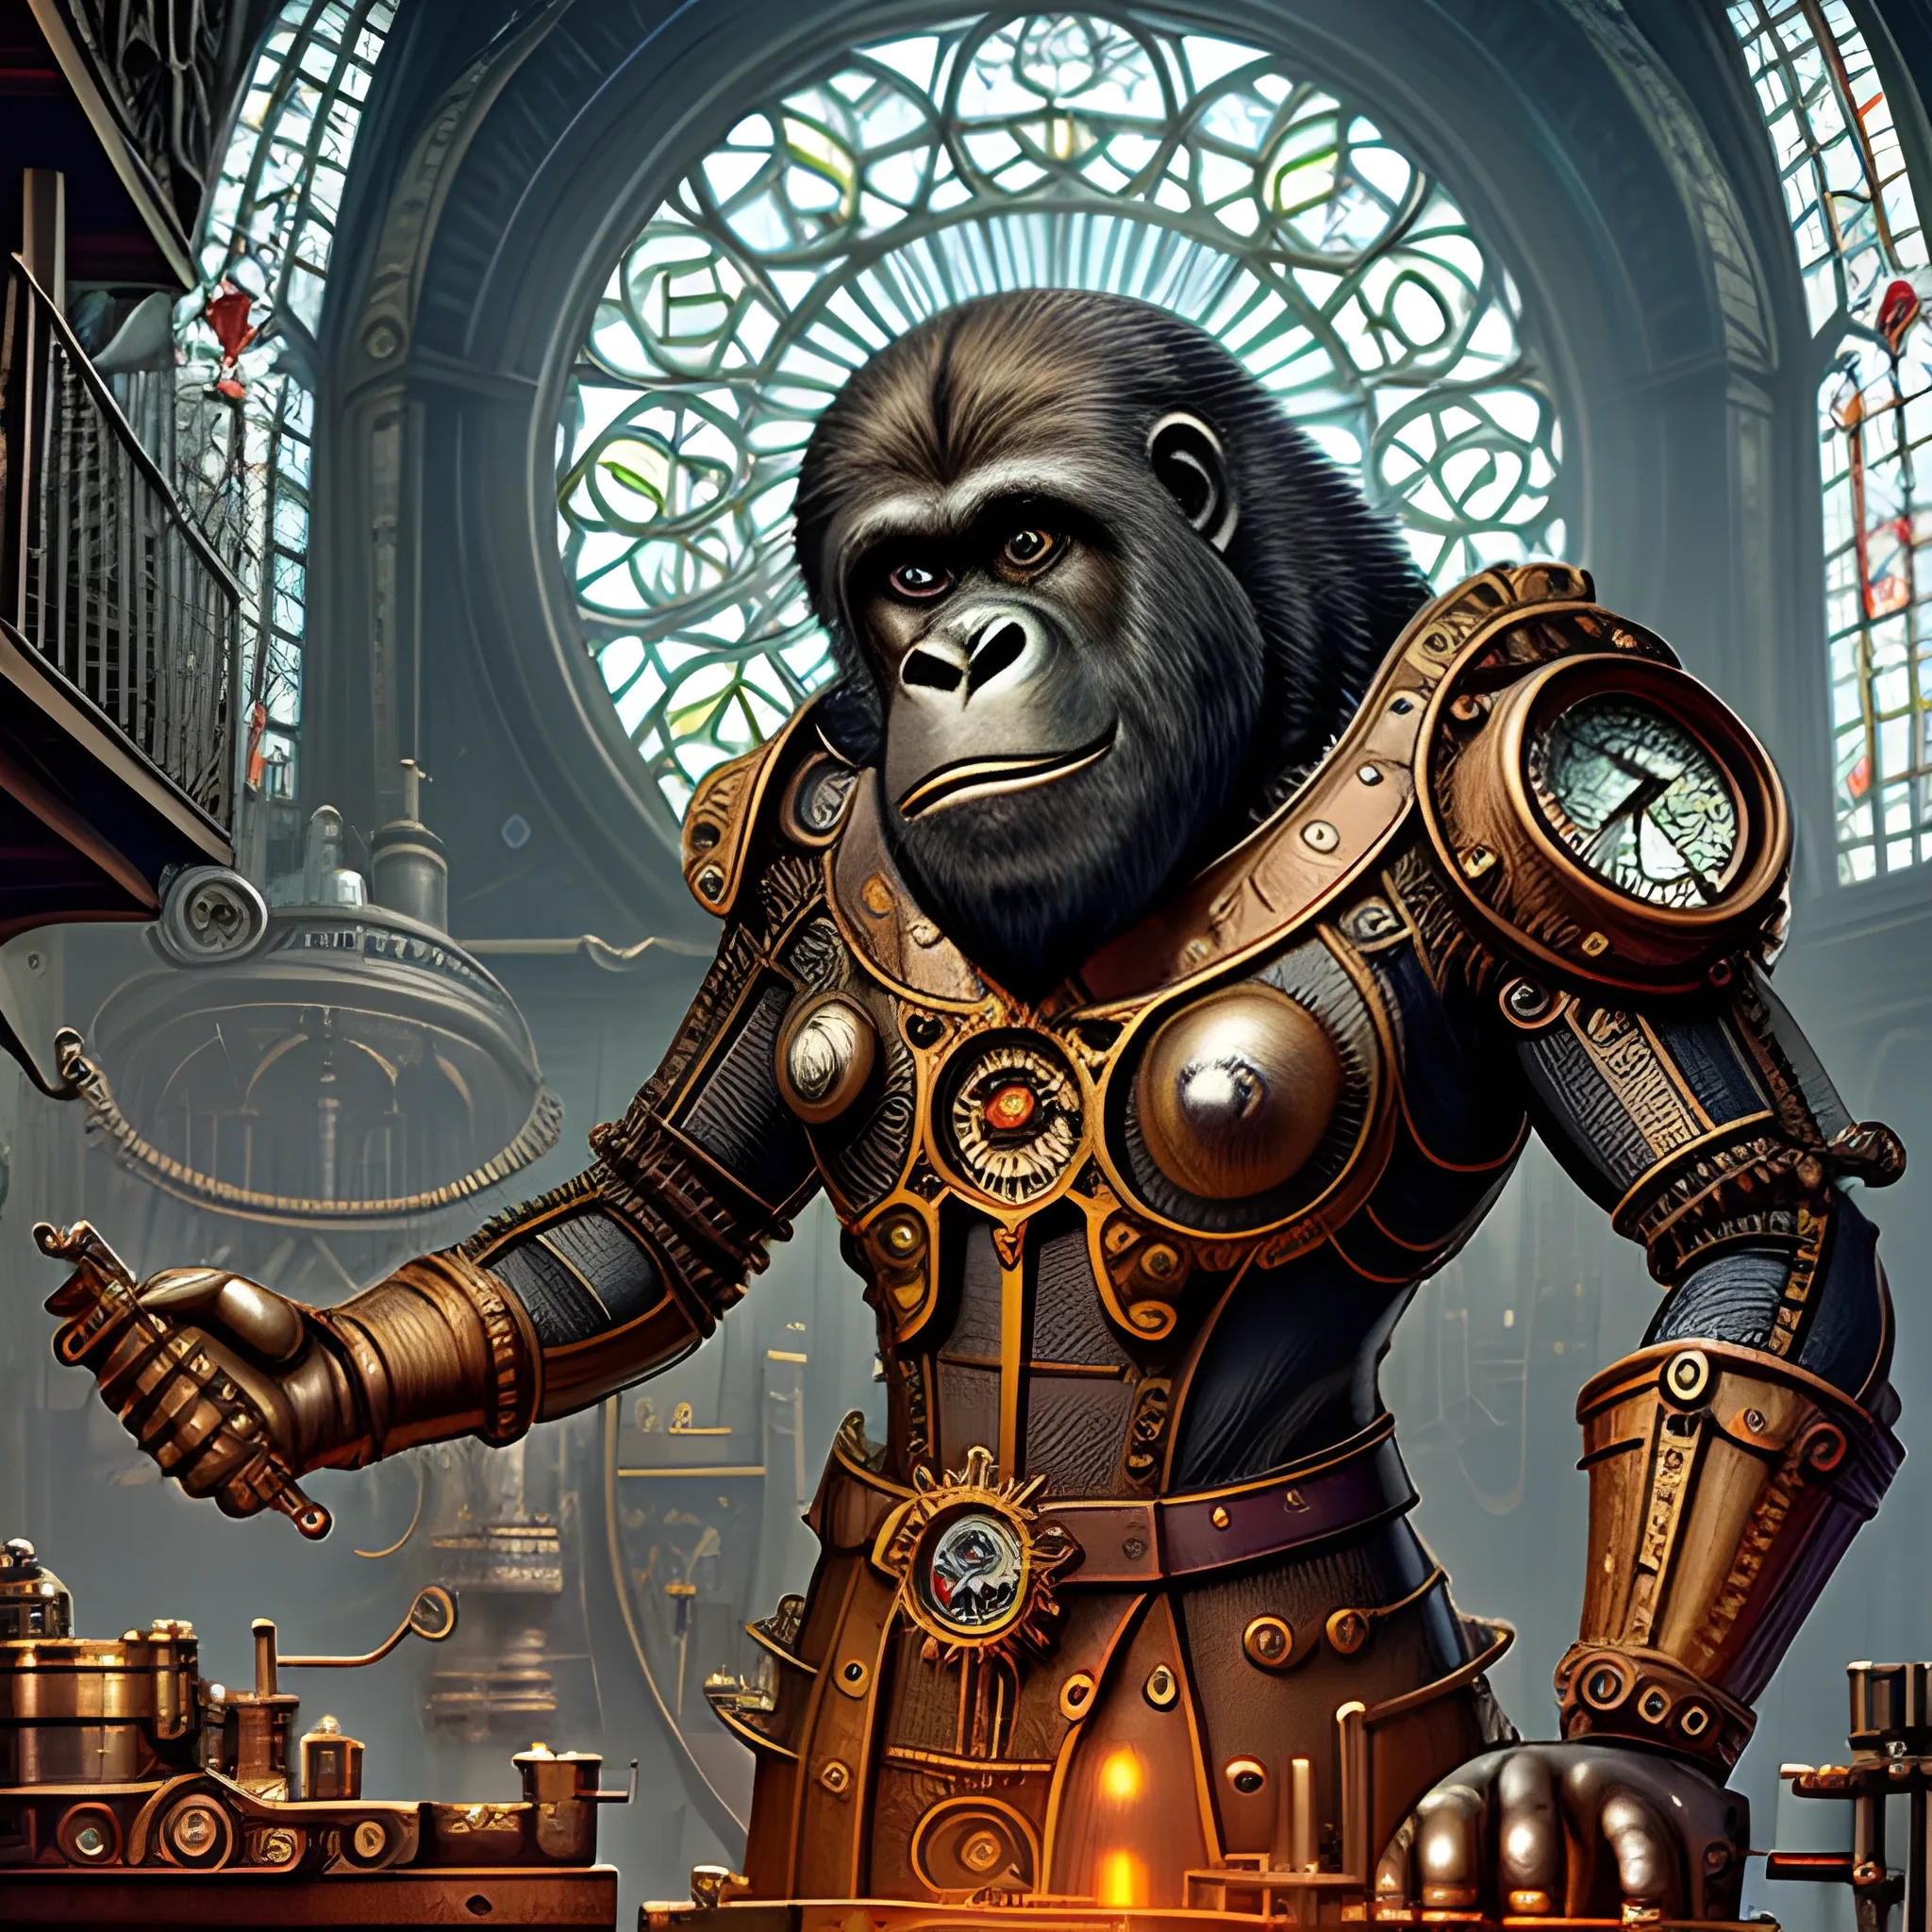  A steampunk-inspired digital illustration of a gorilla inventor in a cluttered workshop, surrounded by intricate machinery and gears. The camera angle is a tiny shot, capturing the gorilla enthusiastic expression as he tinkers with a fantastical contraption. The lighting is warm and atmospheric, with rays of sunlight streaming through stained glass windows, casting vibrant colors and ((shadows)) across the room. The style combines elements of steampunk and clock-punk,and machines tecnologycals resembling the works of Jules Verne jr tolkien and H.R. Giger. The image is detailed and intricate, showcasing the gnome's ingenious inventions and the mesmerizing complexity of the steampunk world. 